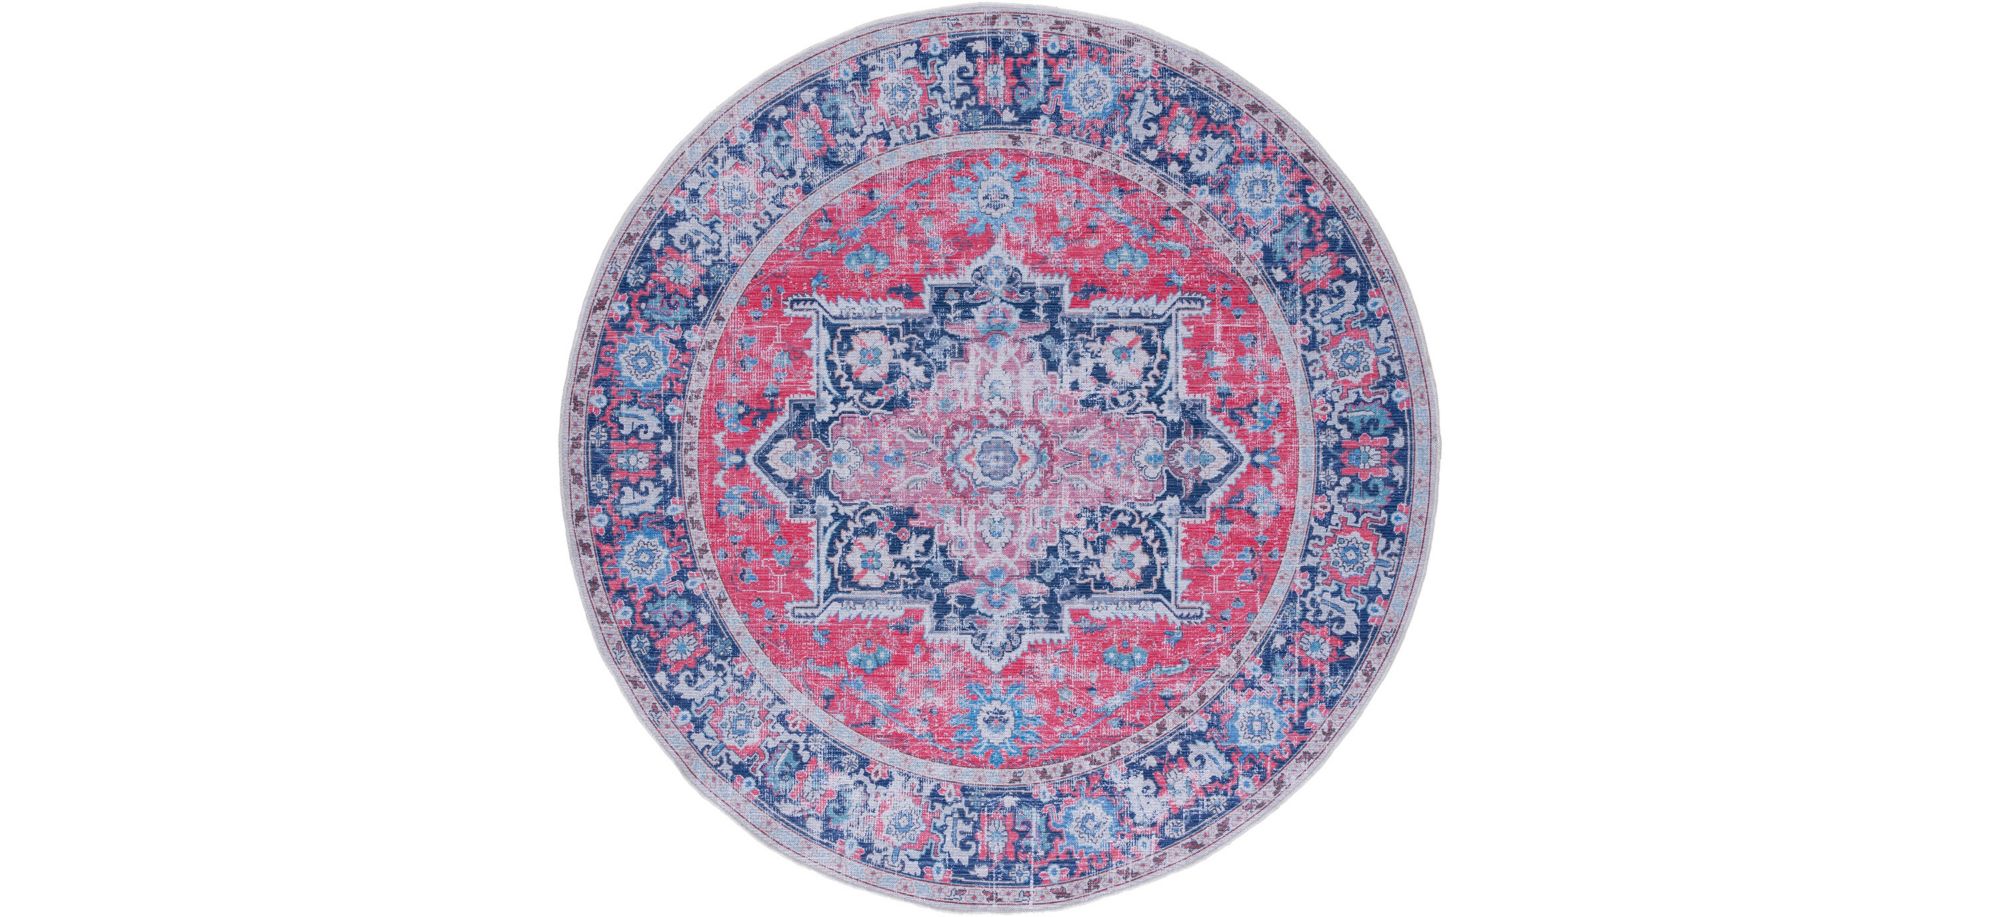 Serapi Area Rug in Red & Navy by Safavieh